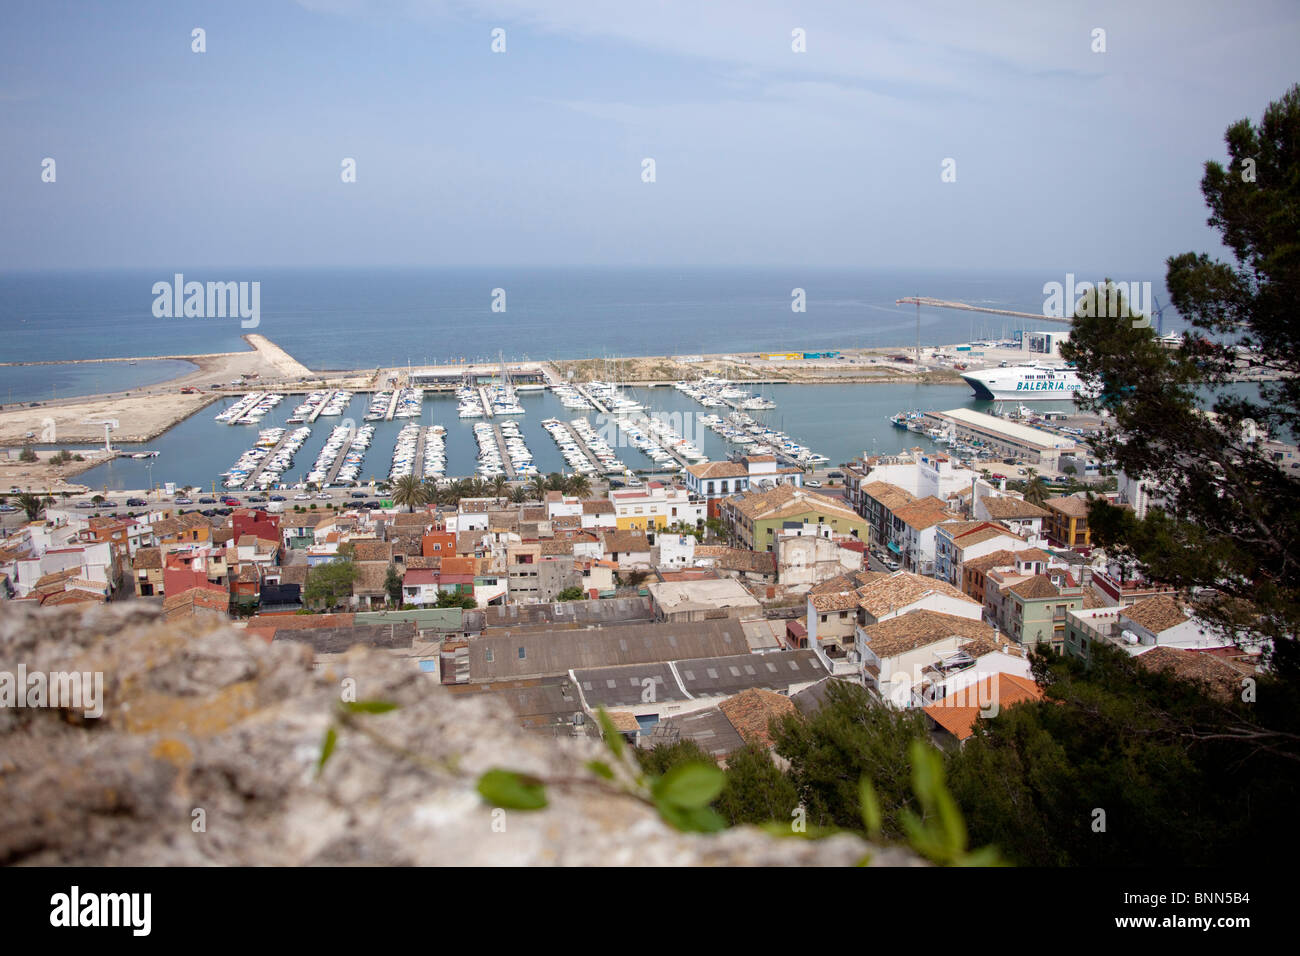 View of Harbour from Old castle 11th & 12th C fortifications overlooking the city of Denia, Spain 106720 Spain10 Stock Photo